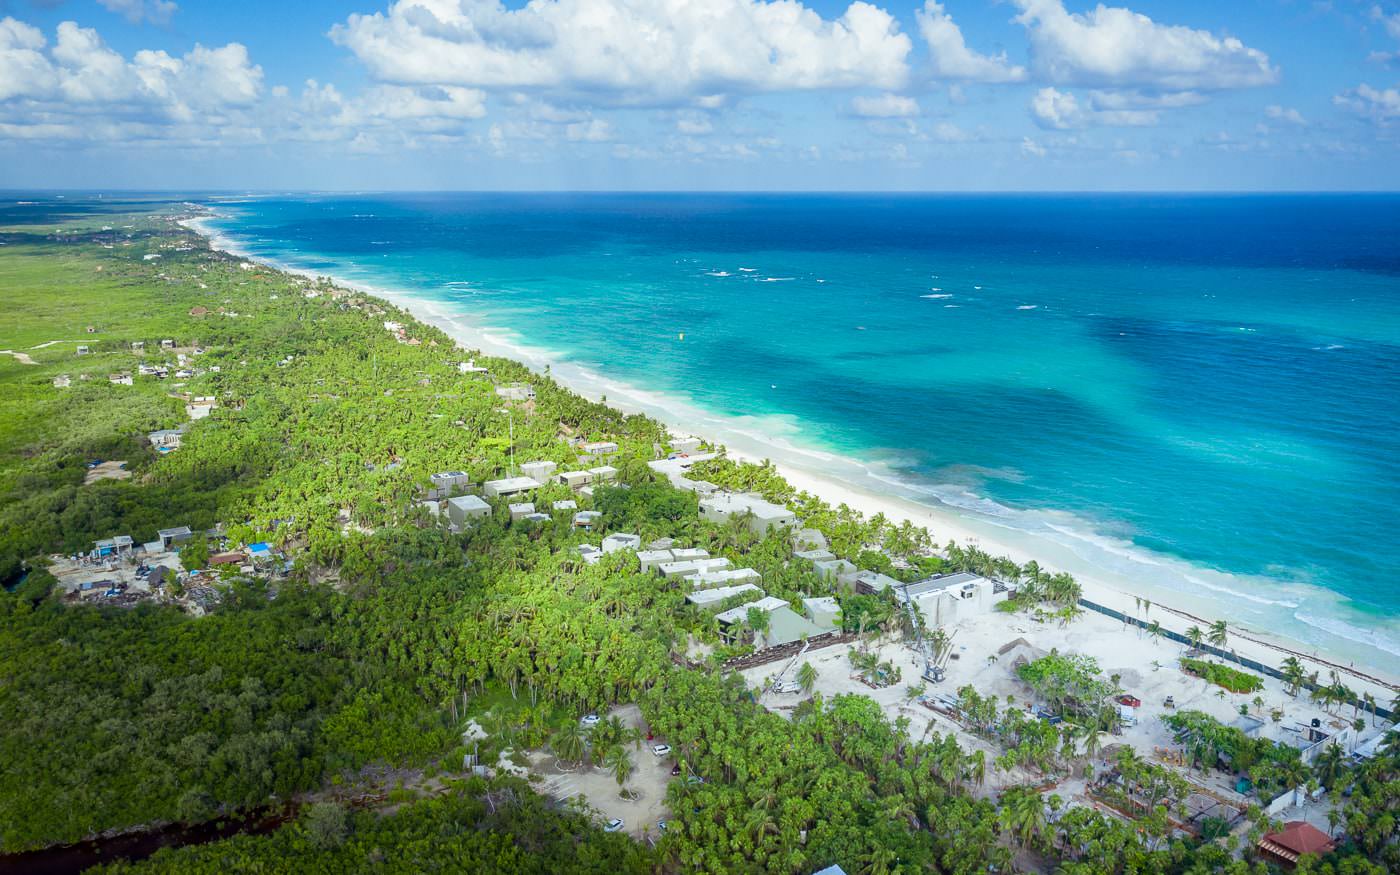 26 Awesome Things to do in Tulum Mexico – 2023 Guide